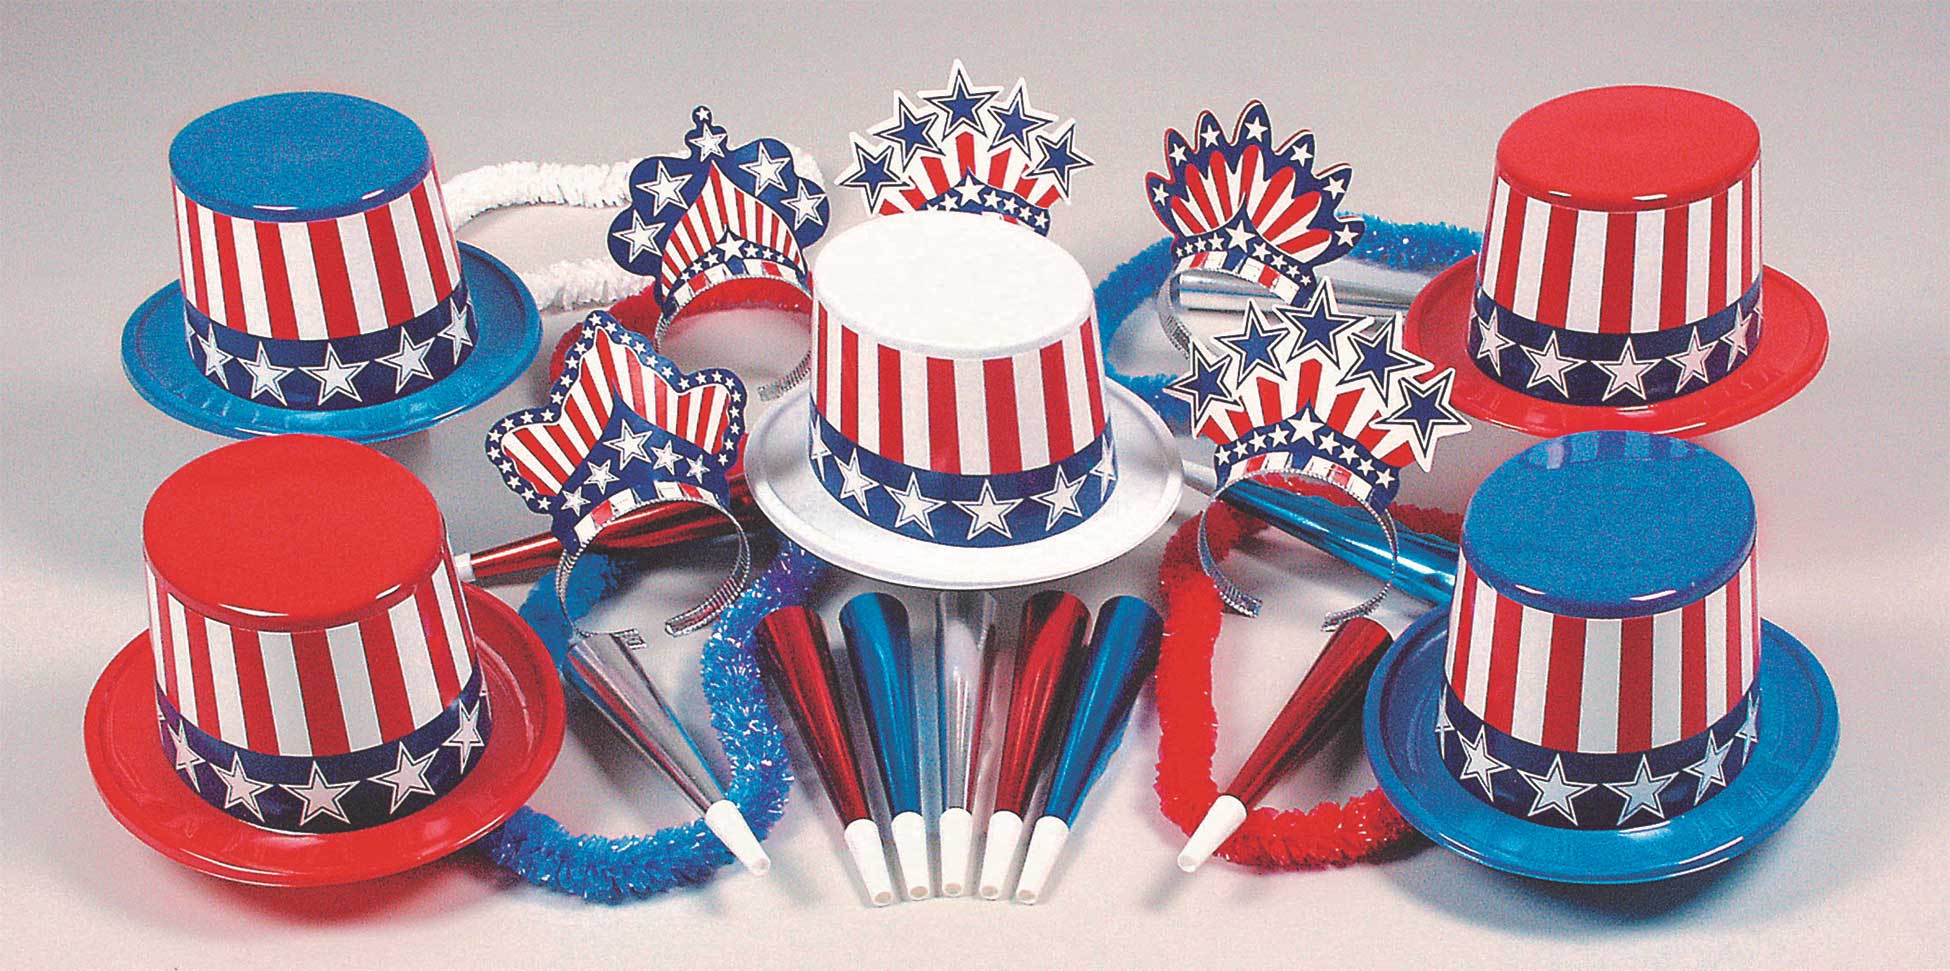 Party Time USA Party Kit For 50 People